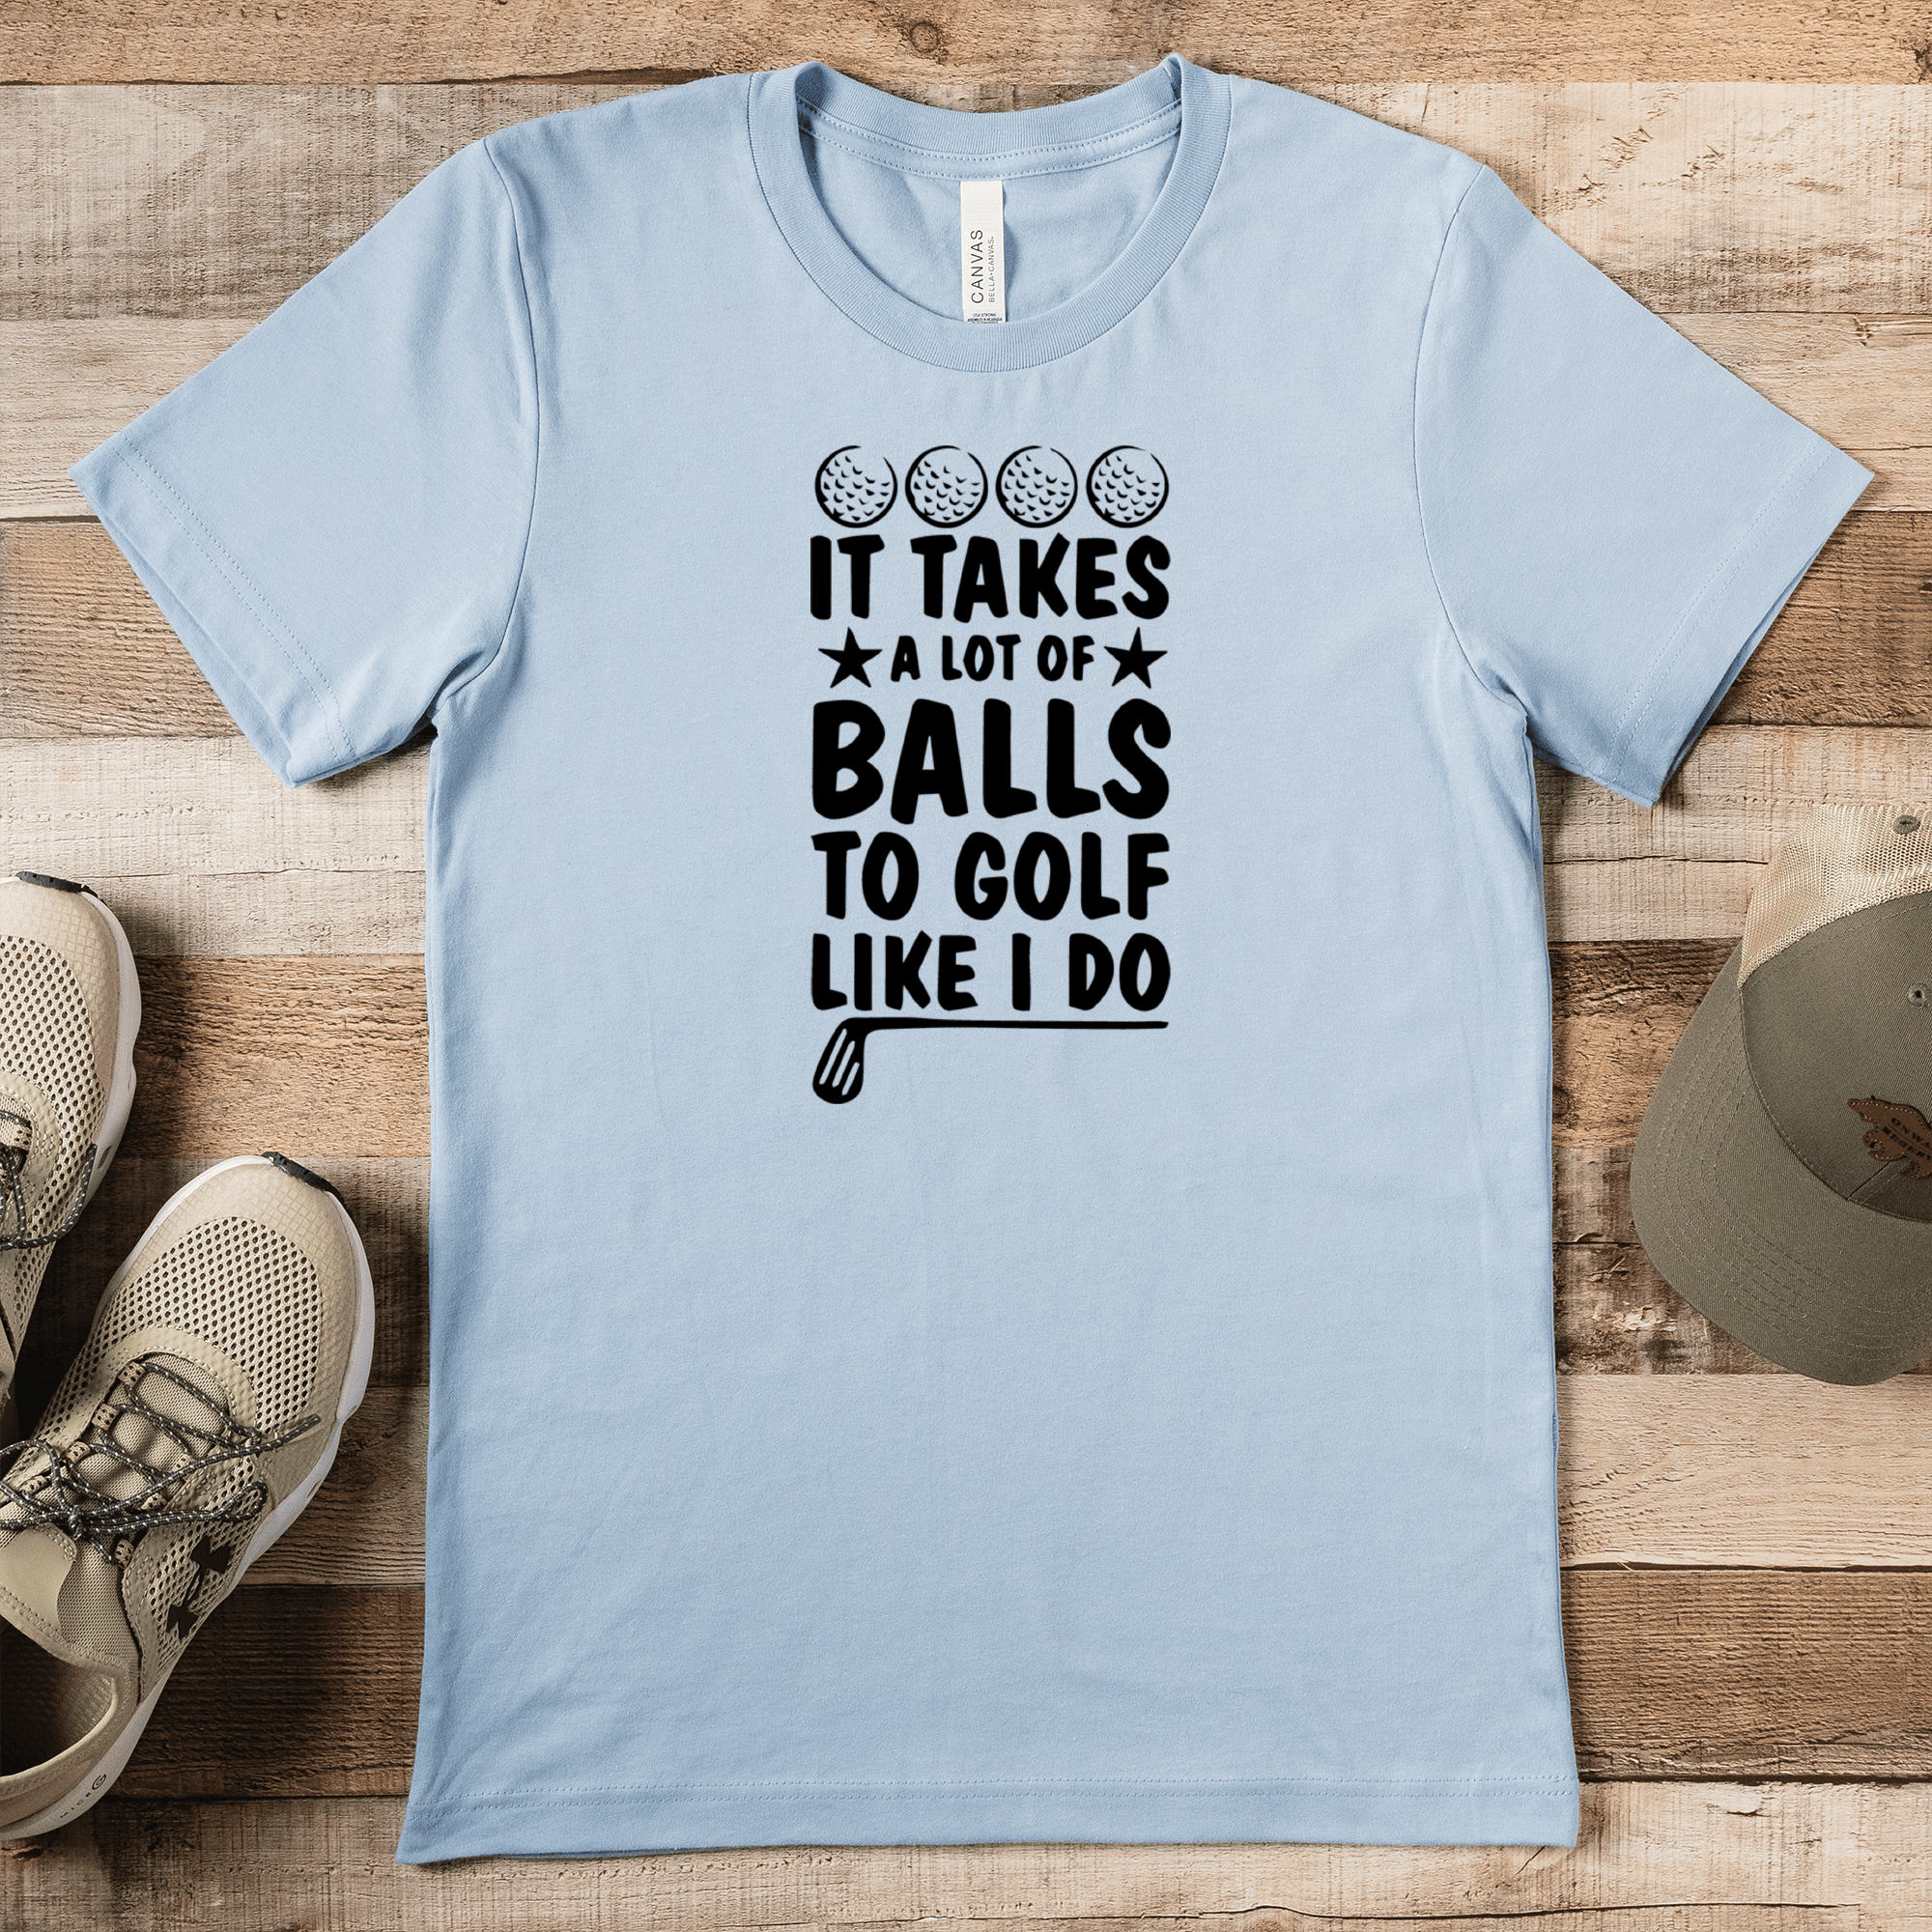 Light Blue Mens T-Shirt With It Takes Balls To Golf Like I Do Design